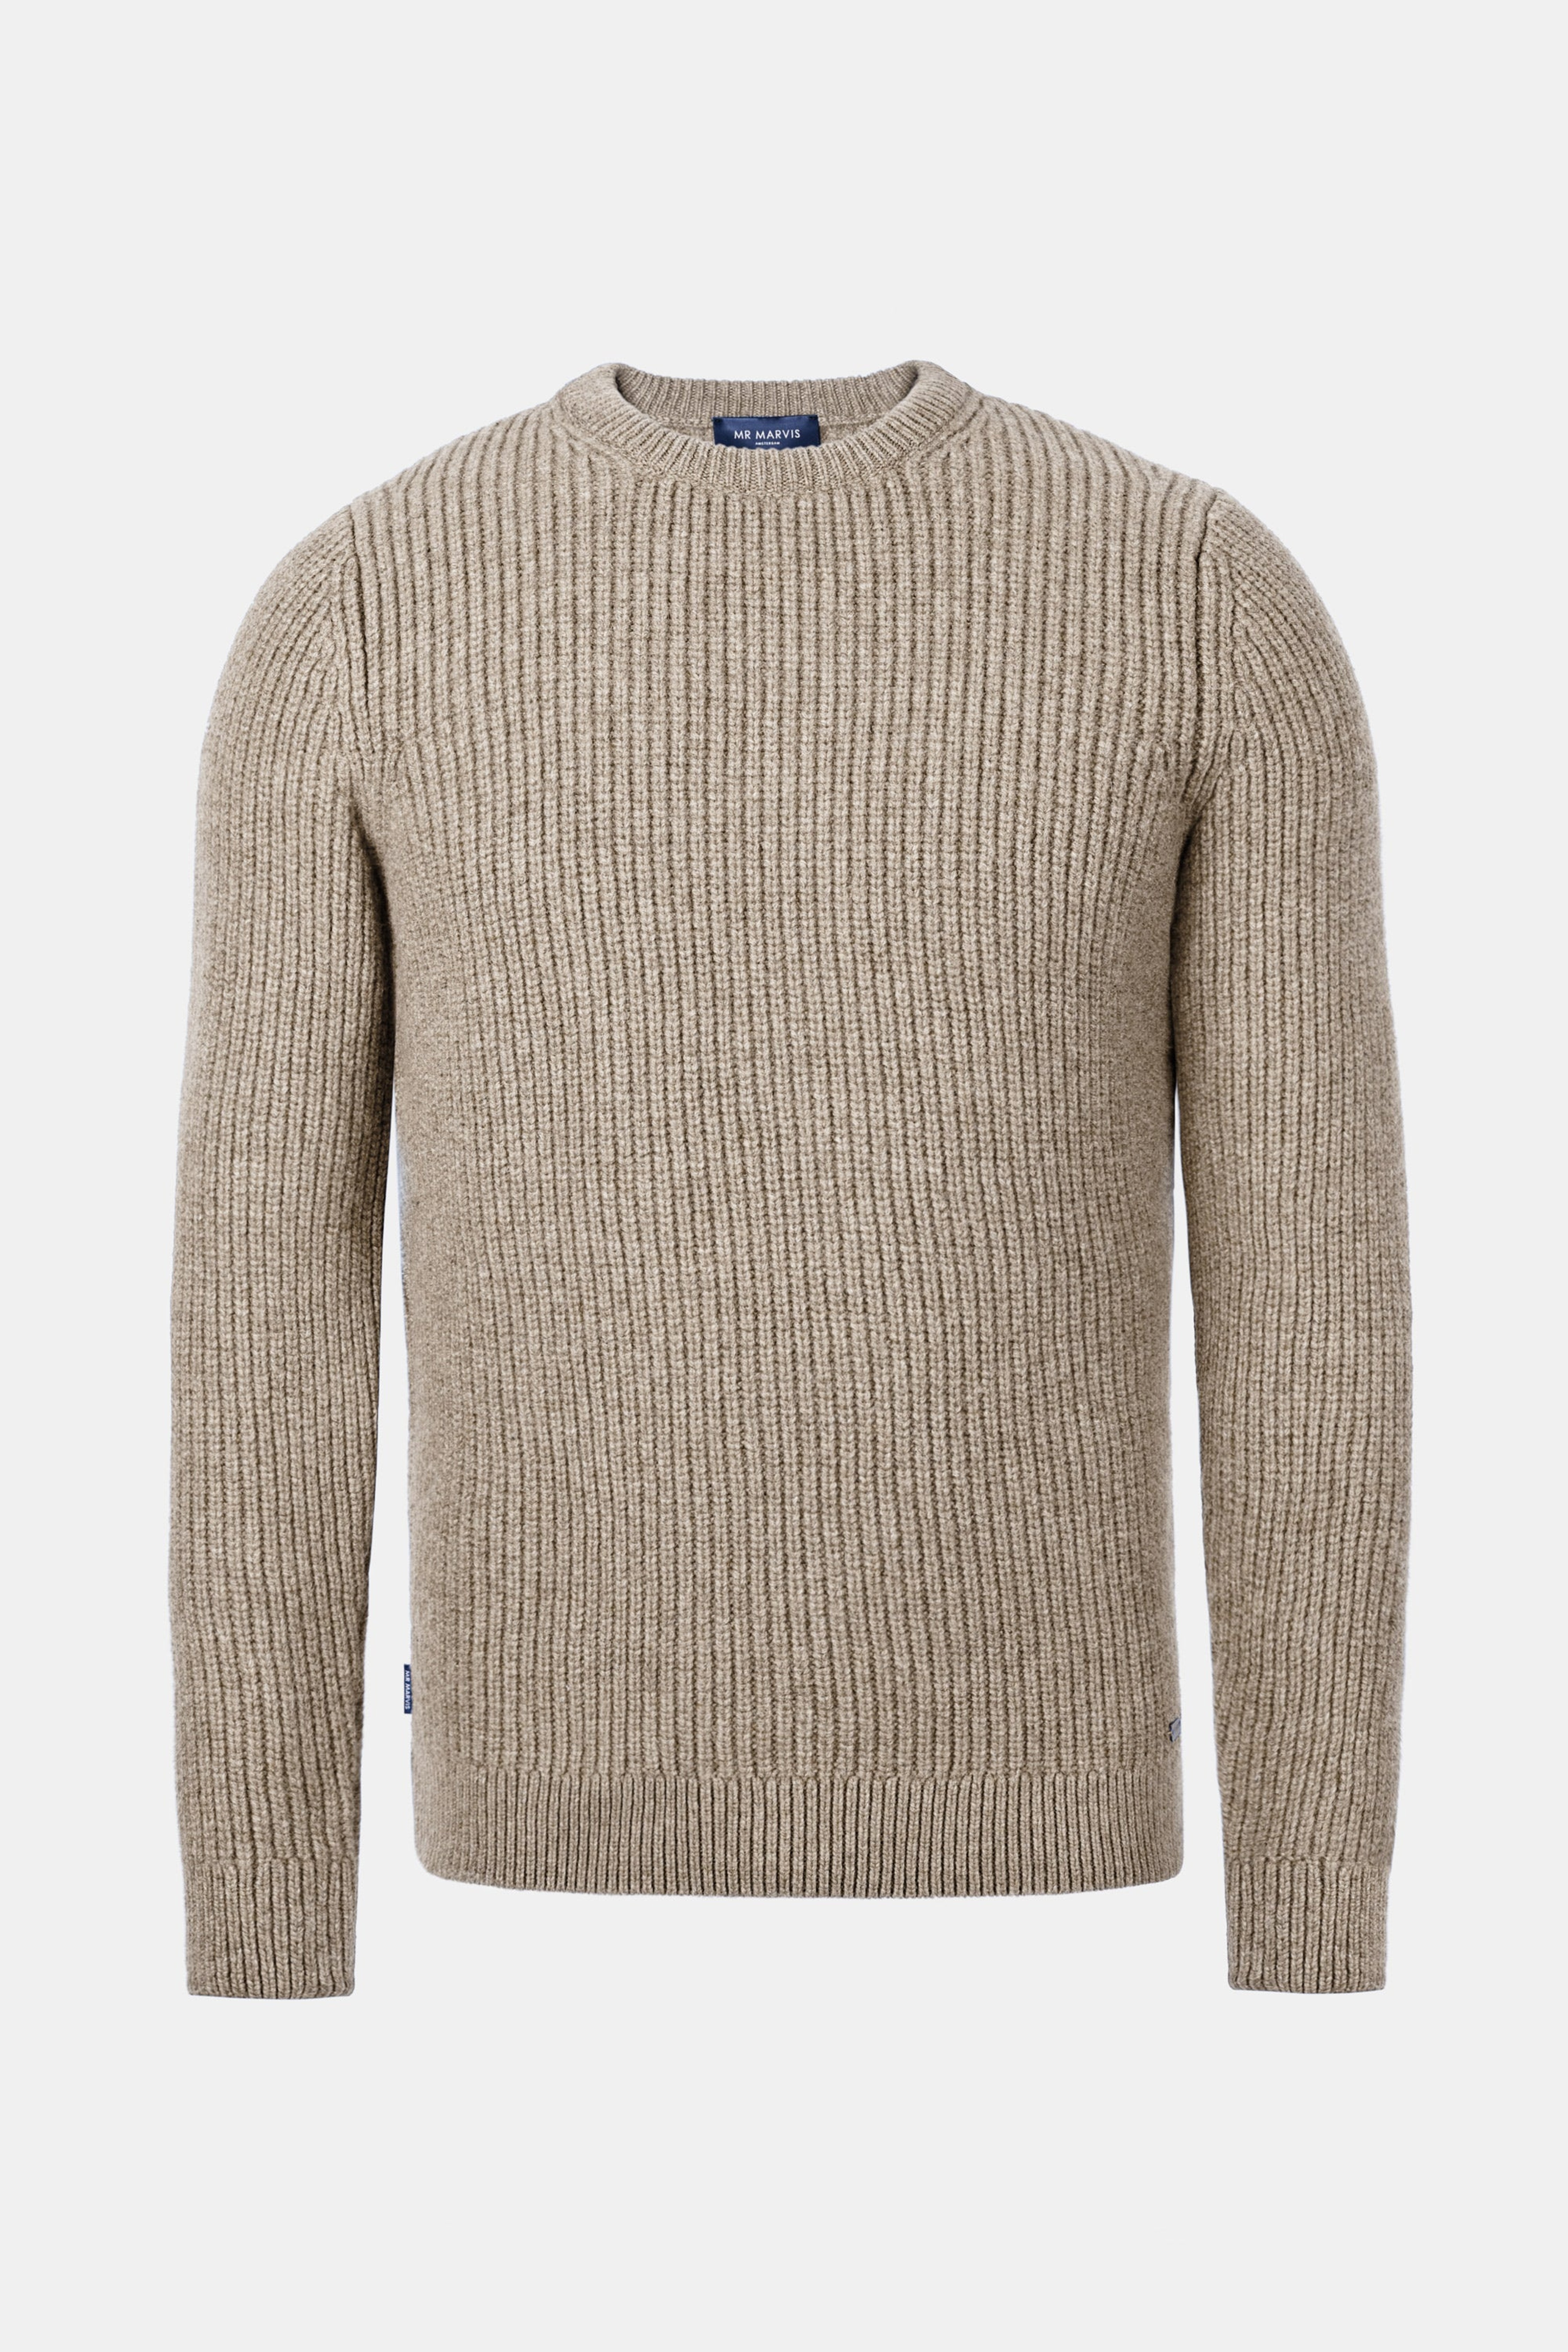 Baristas * The Knit Pullover